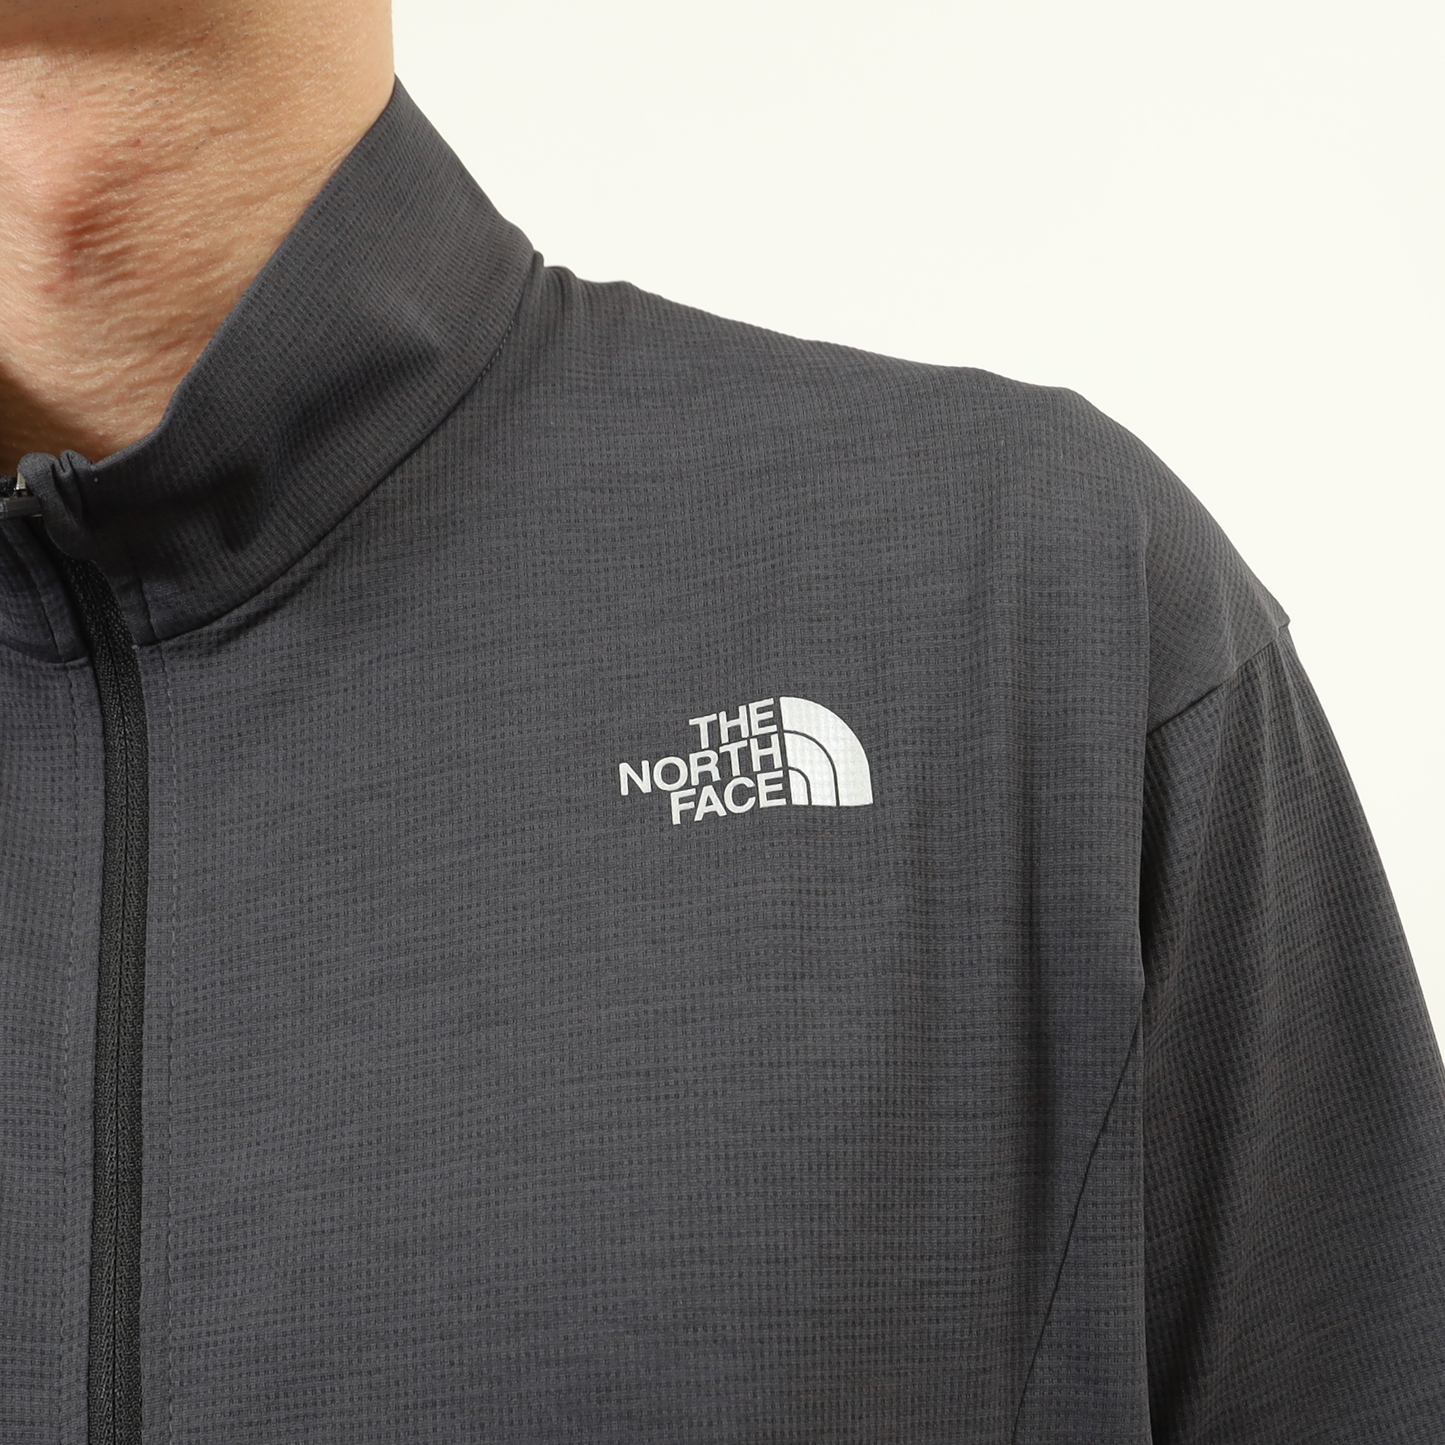 【THE NORTH FACE】S/S Flashdry 3D Zip Up